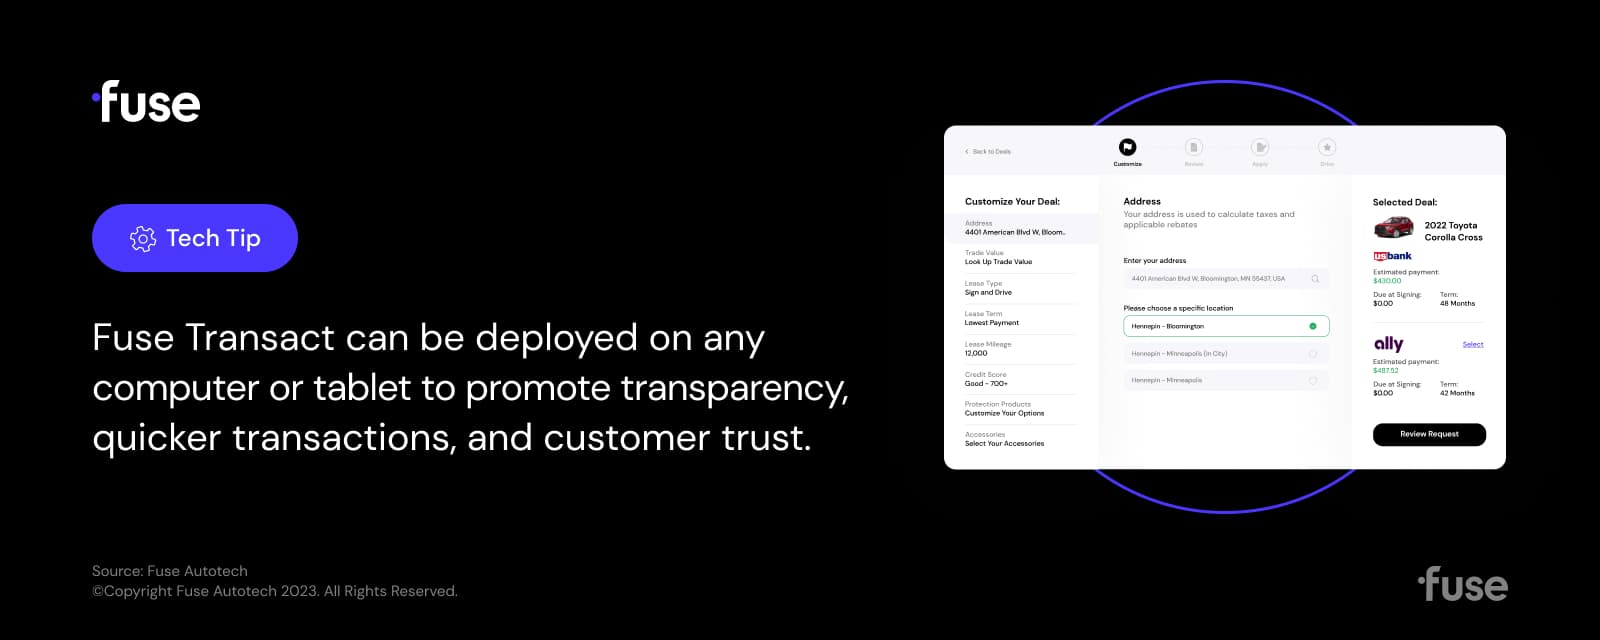 Tech Tip: Fuse Transact can be deployed on any computer or tablet to promote transparency, quicker transactions, and customer trust.